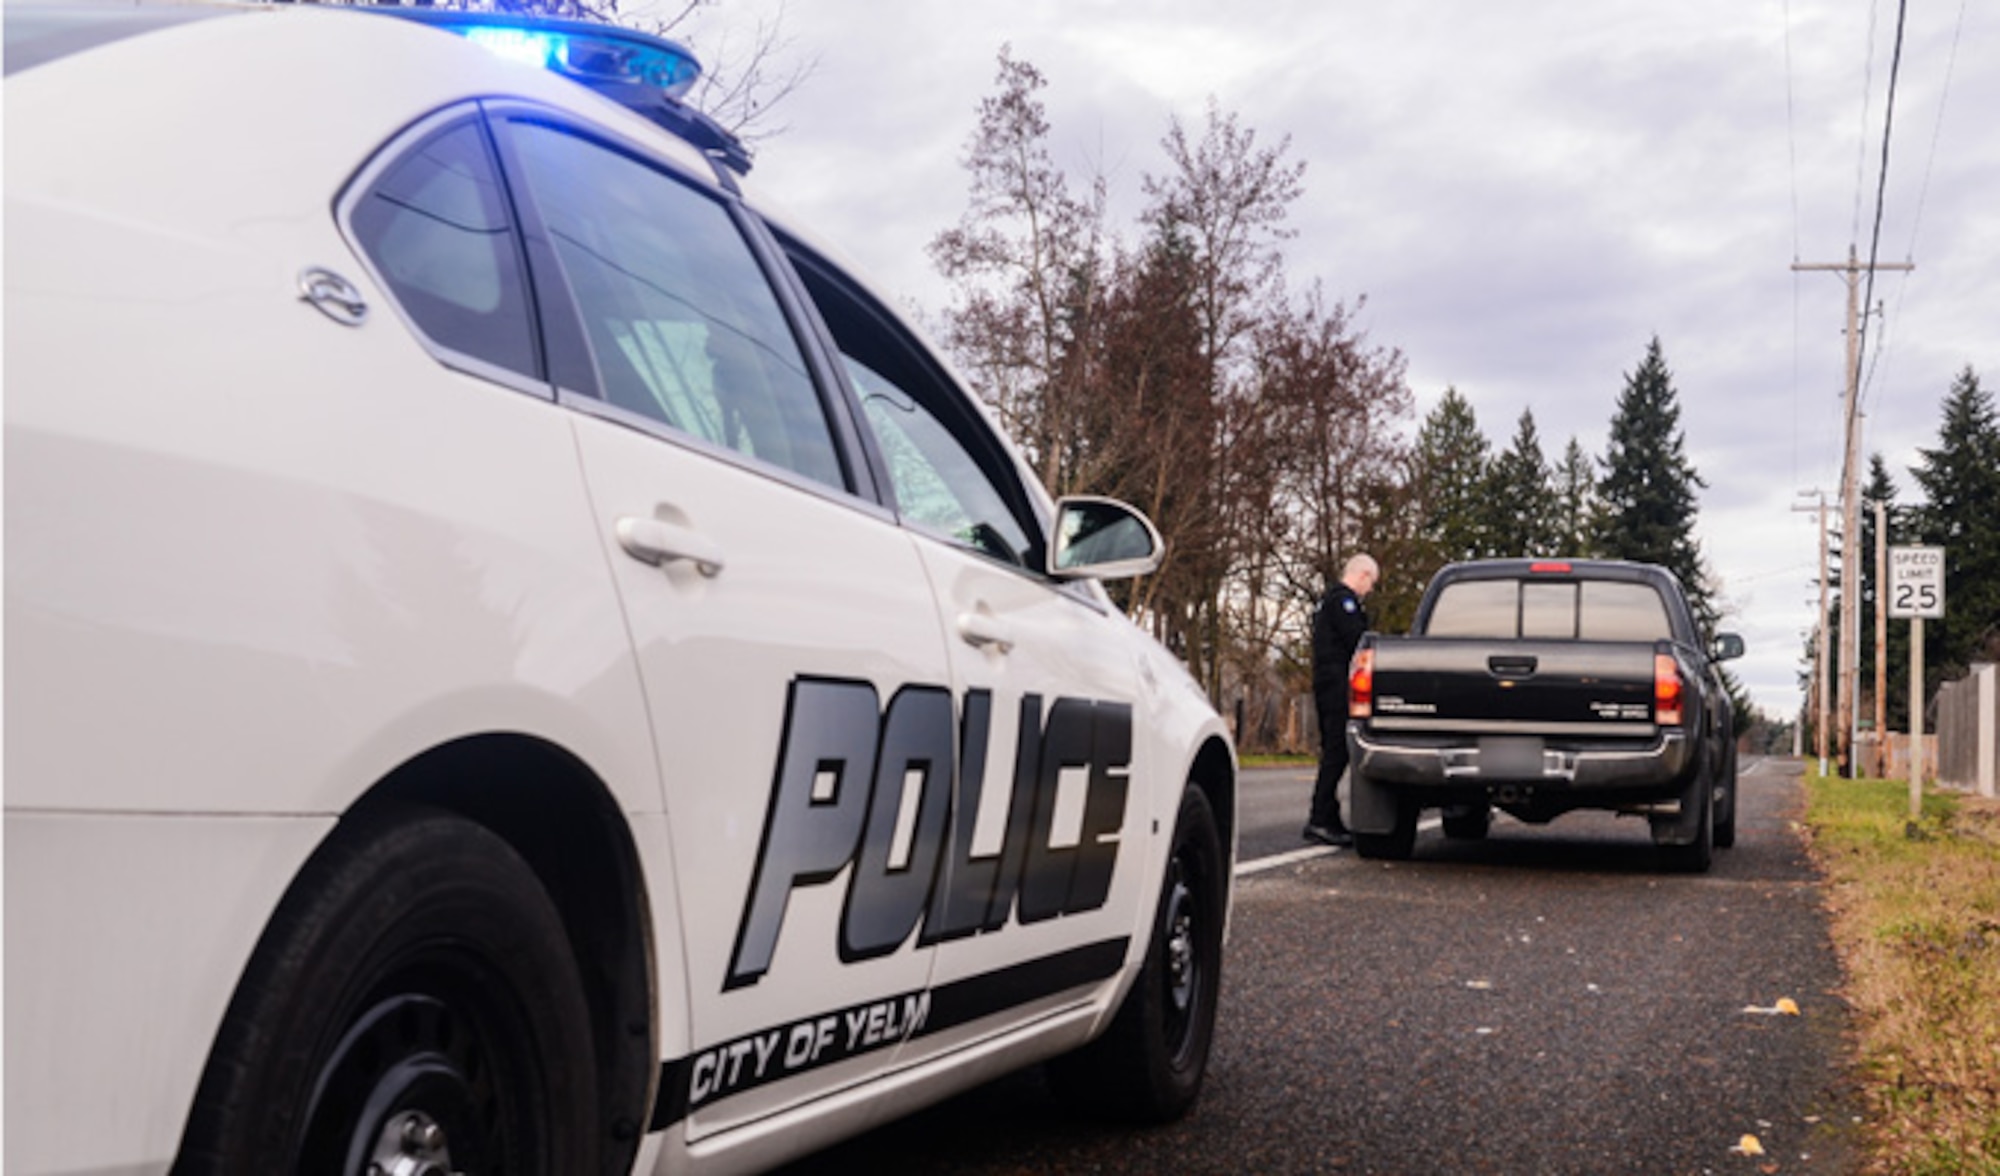 Master Sgt. Phil Ryan, collects a driver's information following a traffic stop, Dec. 14, 2013, in Yelm, Wash. Ryan is the 62nd Airlift Wing Inspector General complaint resolution superintendent, also a reserve police officer at the Yelm Police Department As a sworn peace officer, Ryan volunteers his free time with police department. (U.S. Air Force photo/Tech. Sgt. Sean Tobin)